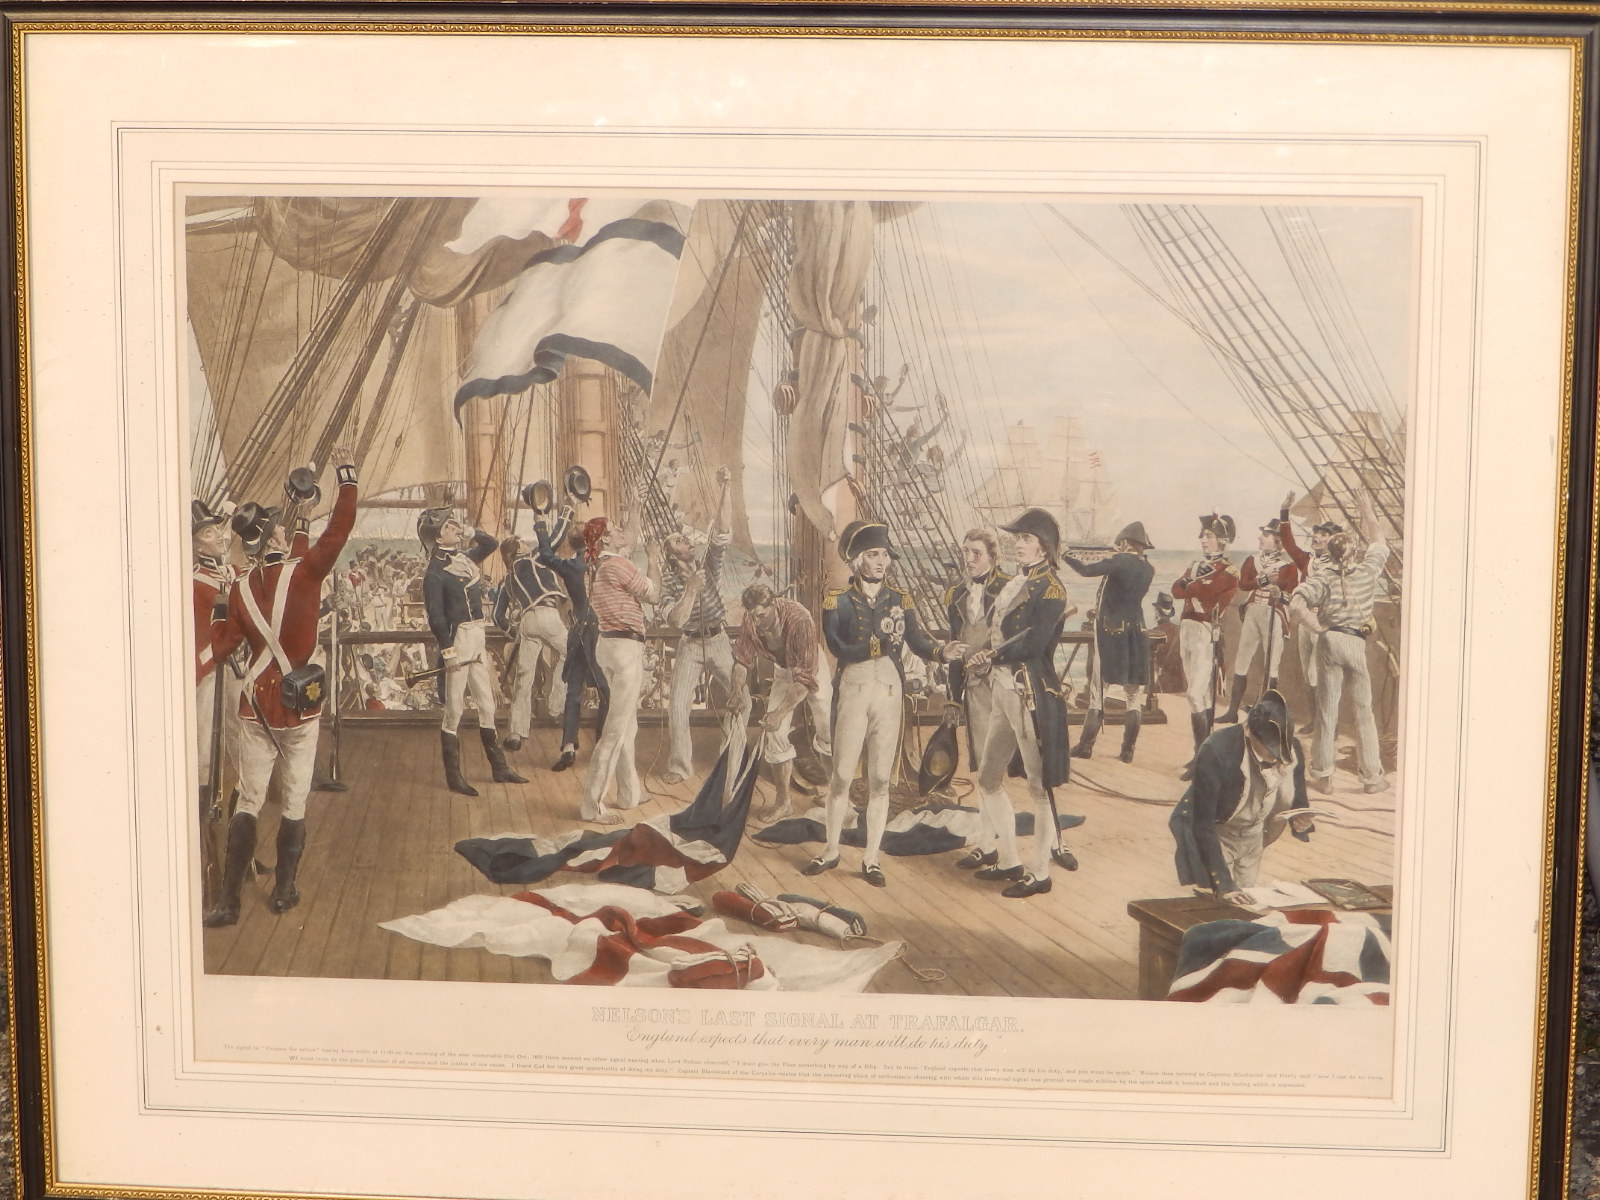 Nelson's Last Signal at Trafalgar' - colour print by Landeker & Brown after Davidson, Parker Gallery - Image 2 of 3